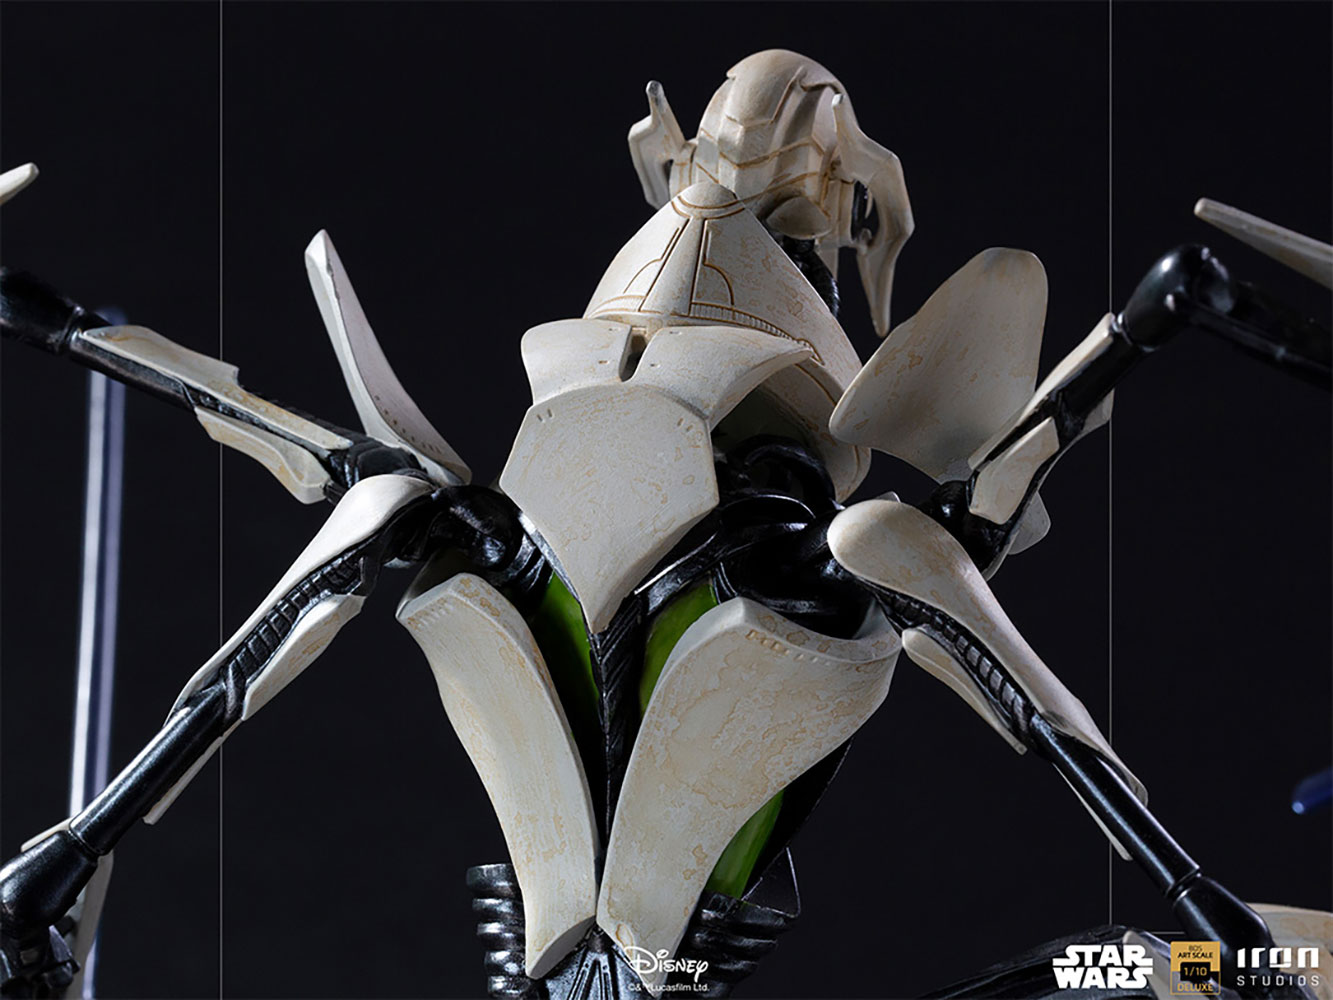 general-grievous-deluxe_star-wars_gallery_609097e64aedb.jpg